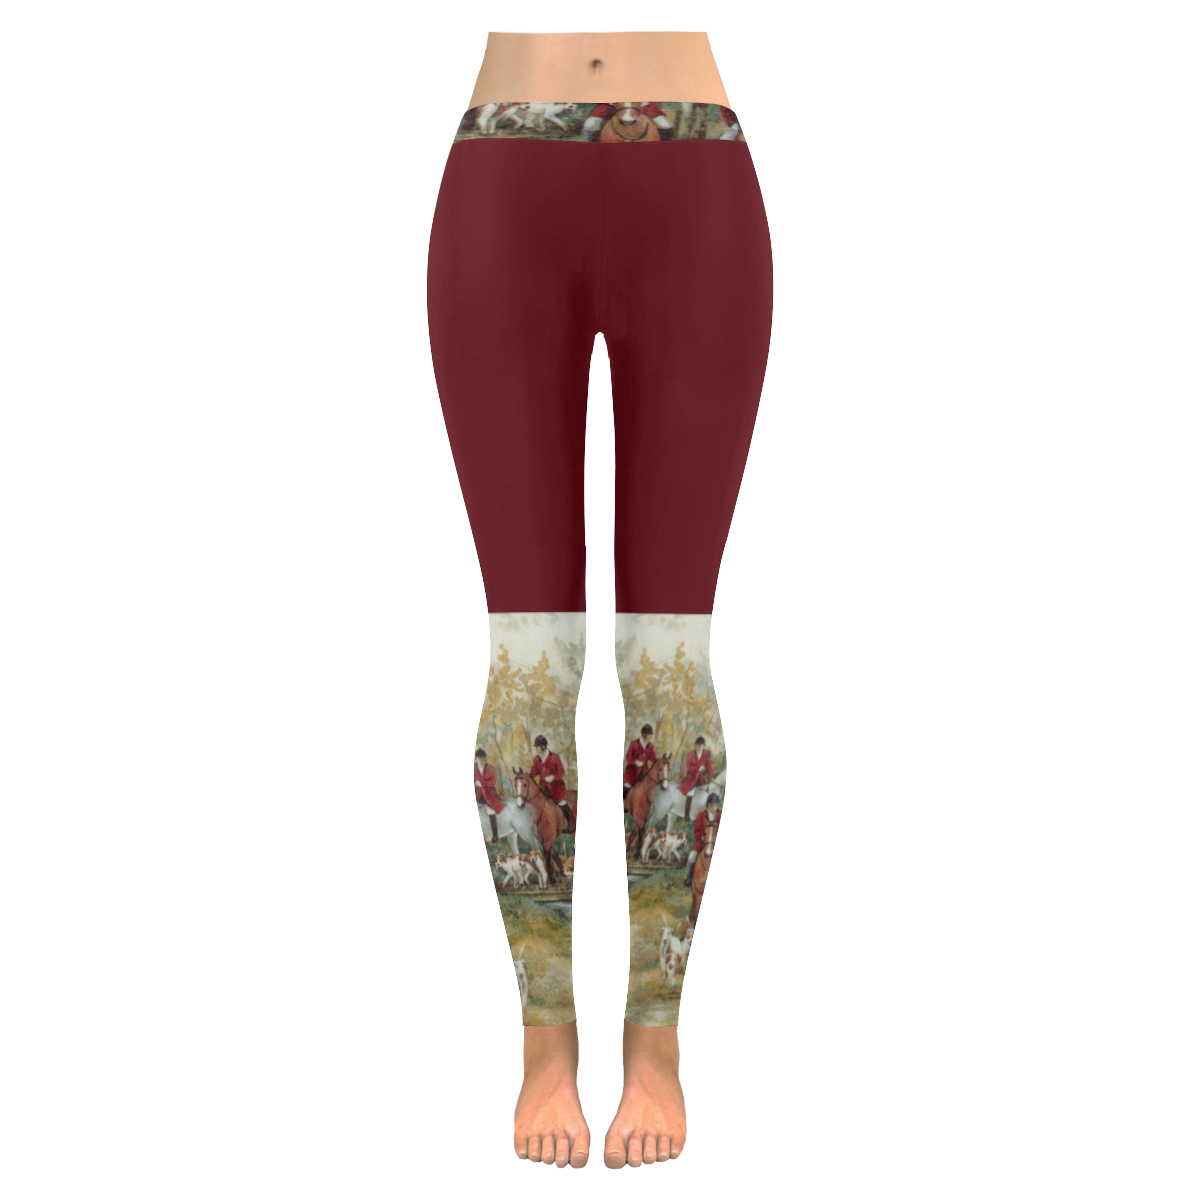 Retro Print High Waist Equestrian Caribu Horse Rugs Yoga Leggings Stretchy  Stretch Sports Tights With Breathable Design For Gym Workouts From  Bertinafara, $17.06 | DHgate.Com